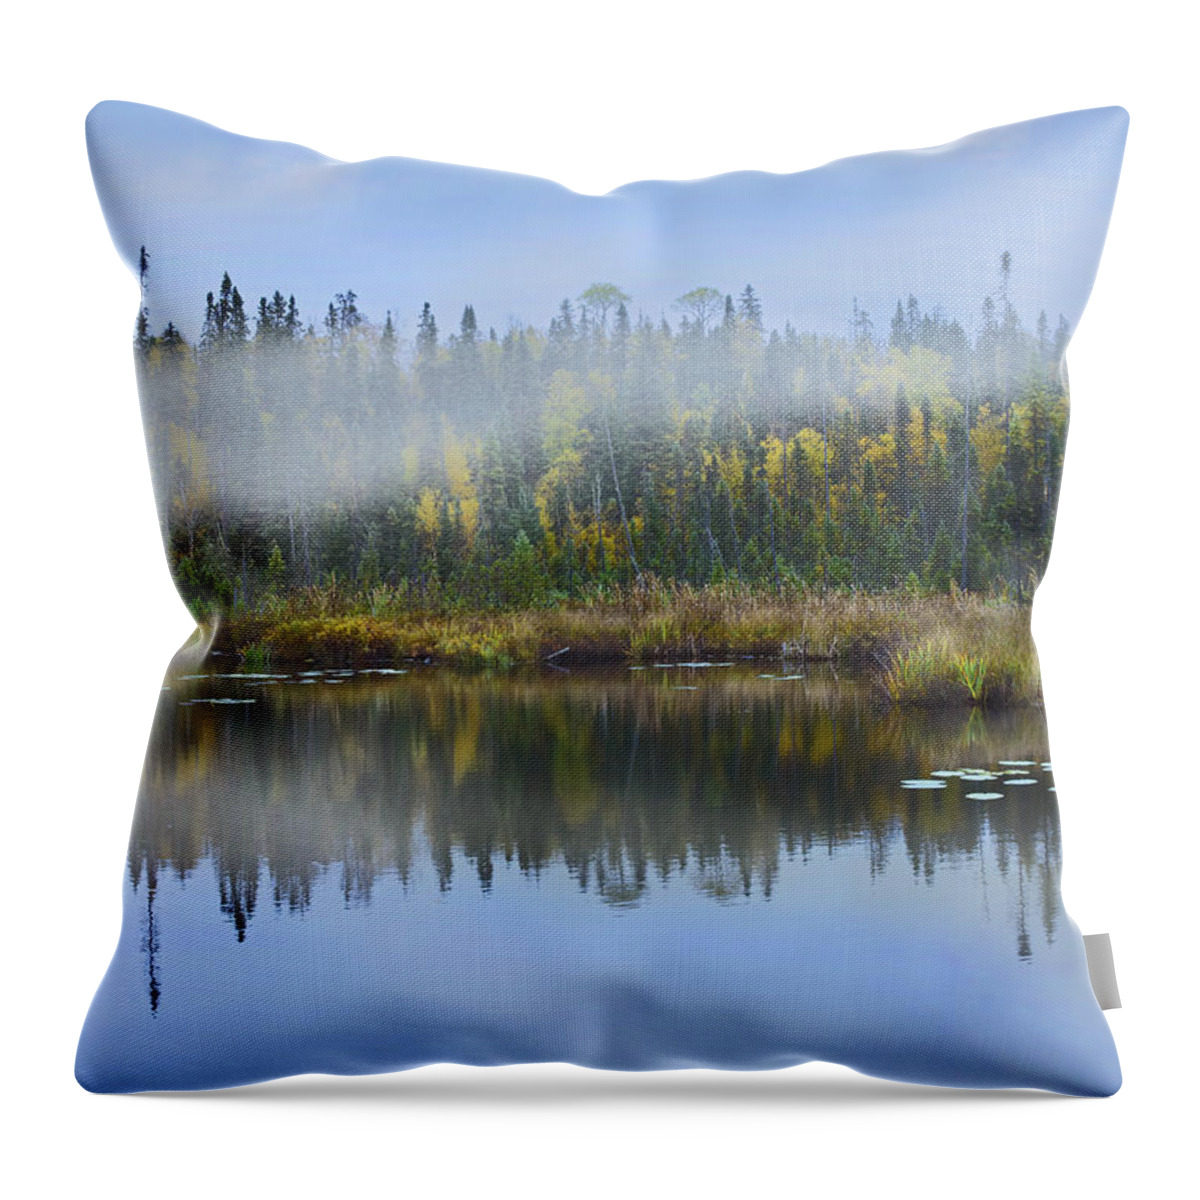 00176925 Throw Pillow featuring the photograph Fog Over Lake Ontario Canada by Tim Fitzharris